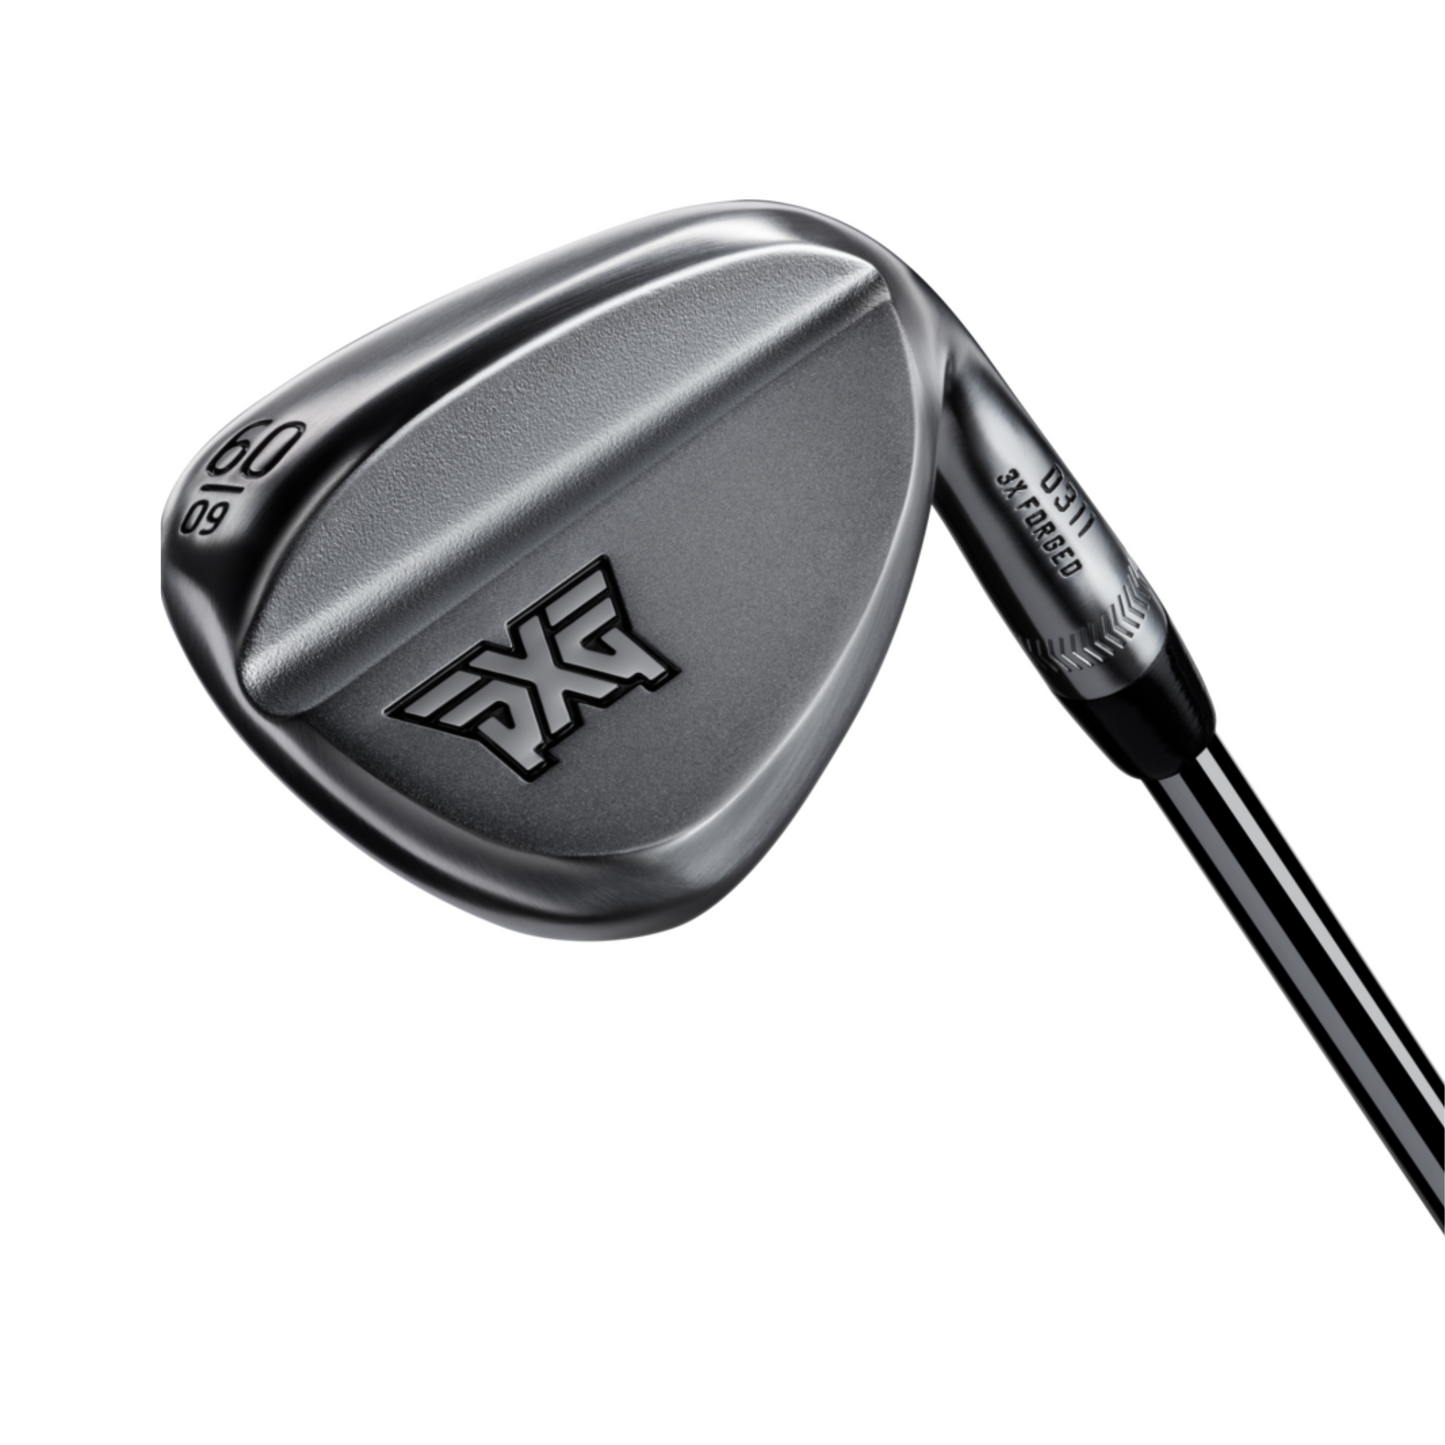 PXG 0311 V3 Forged Golf Wedge 50 Standard Right Hand